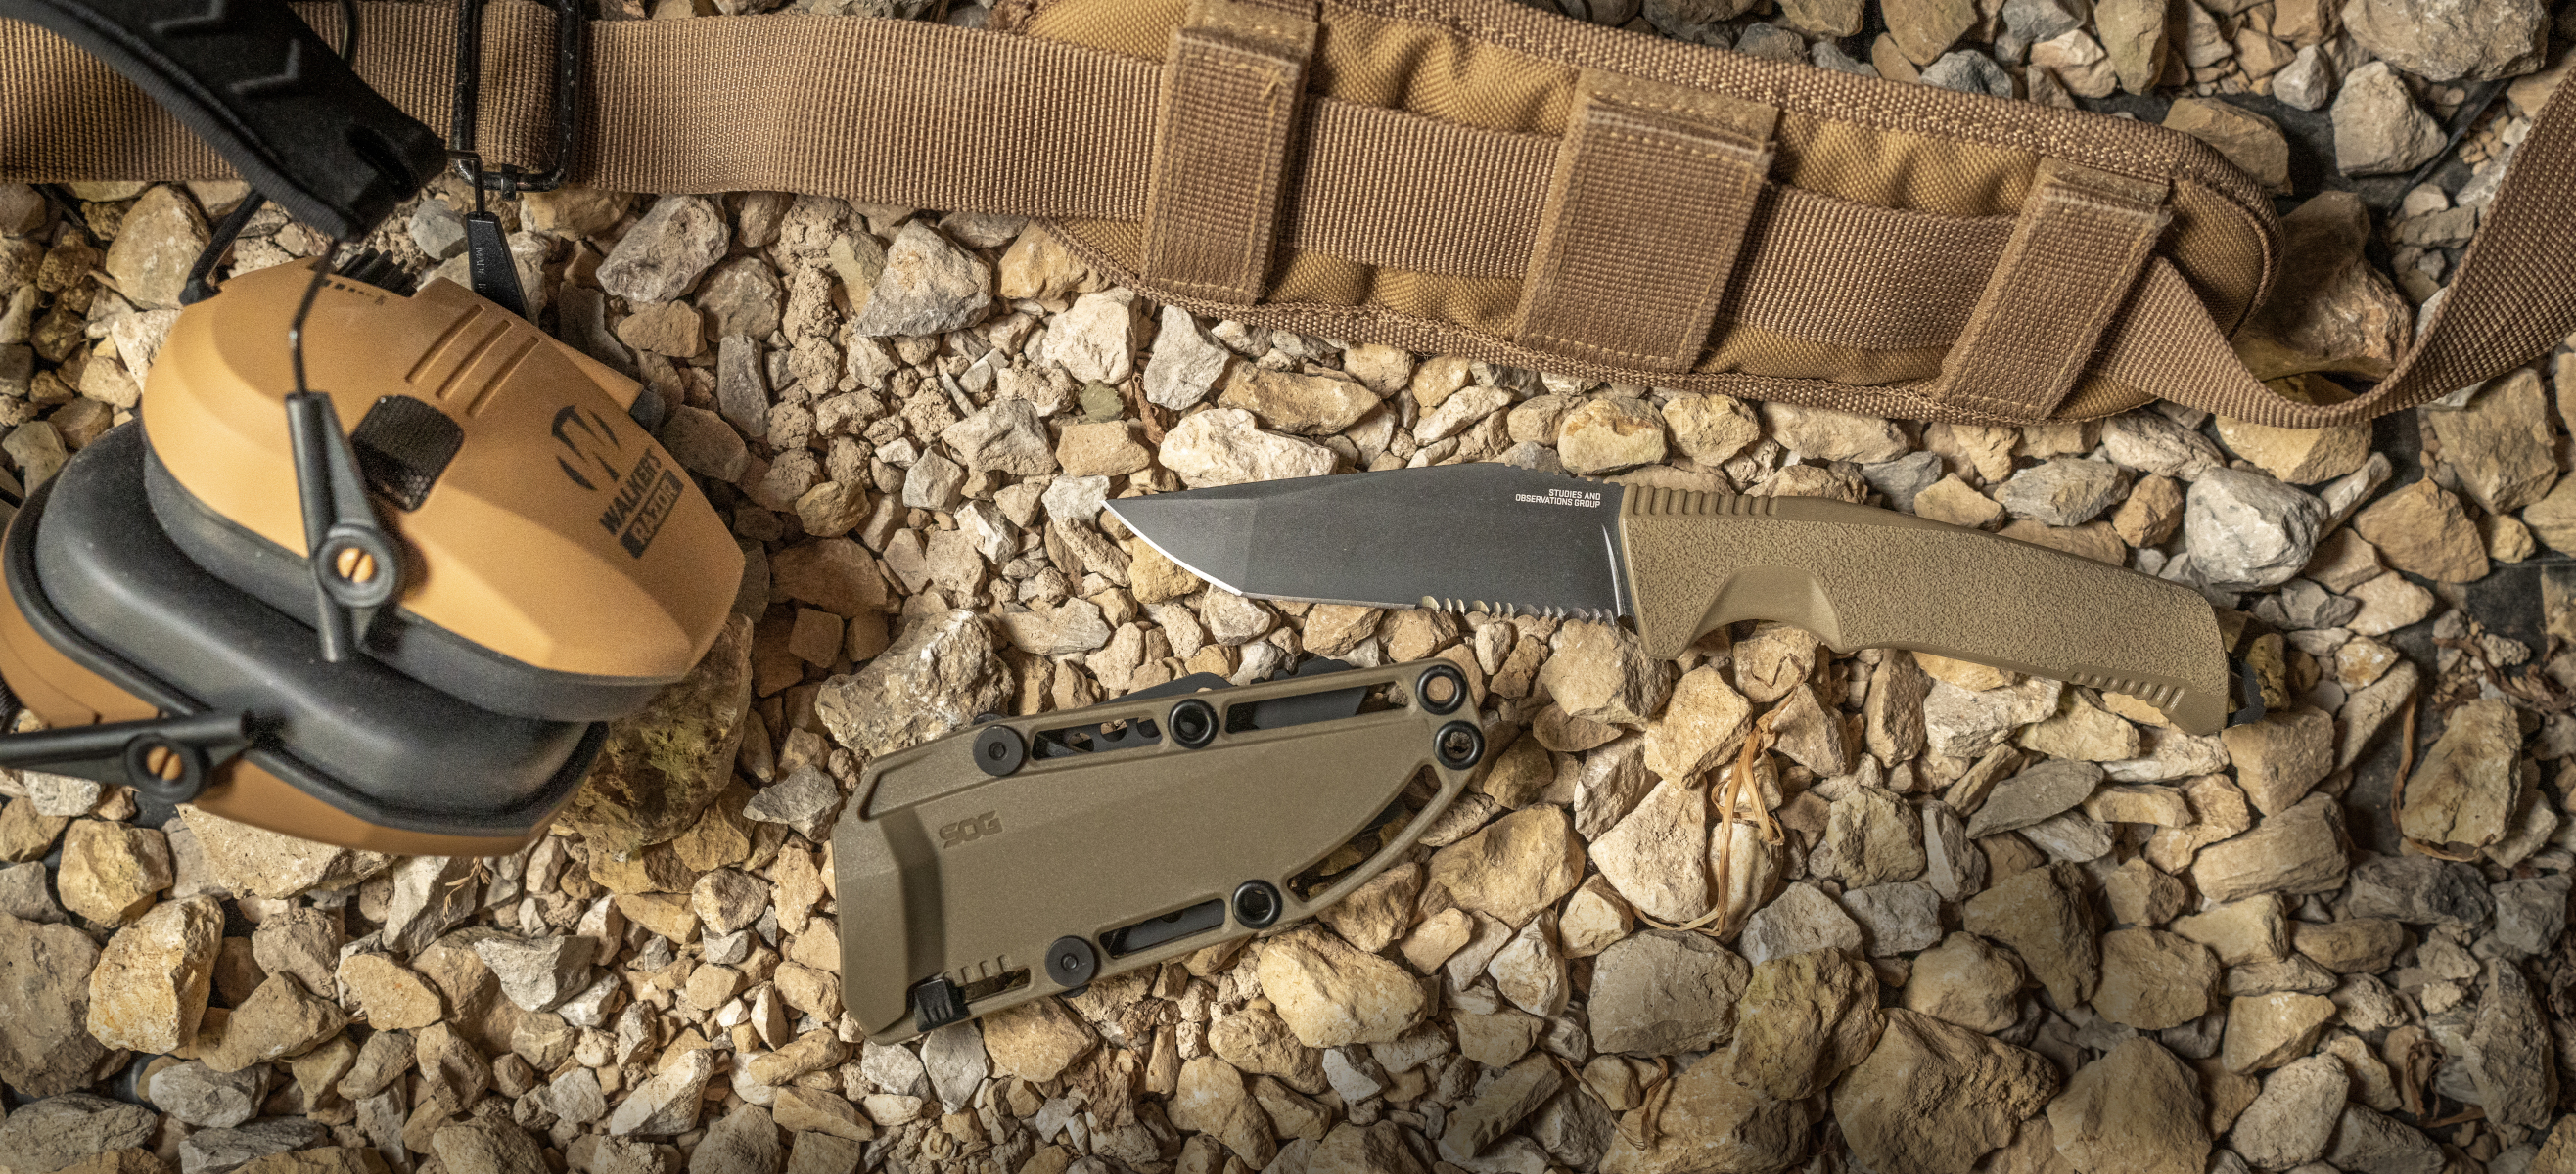 Cold Steel Tanto Lite - The EDC Solution